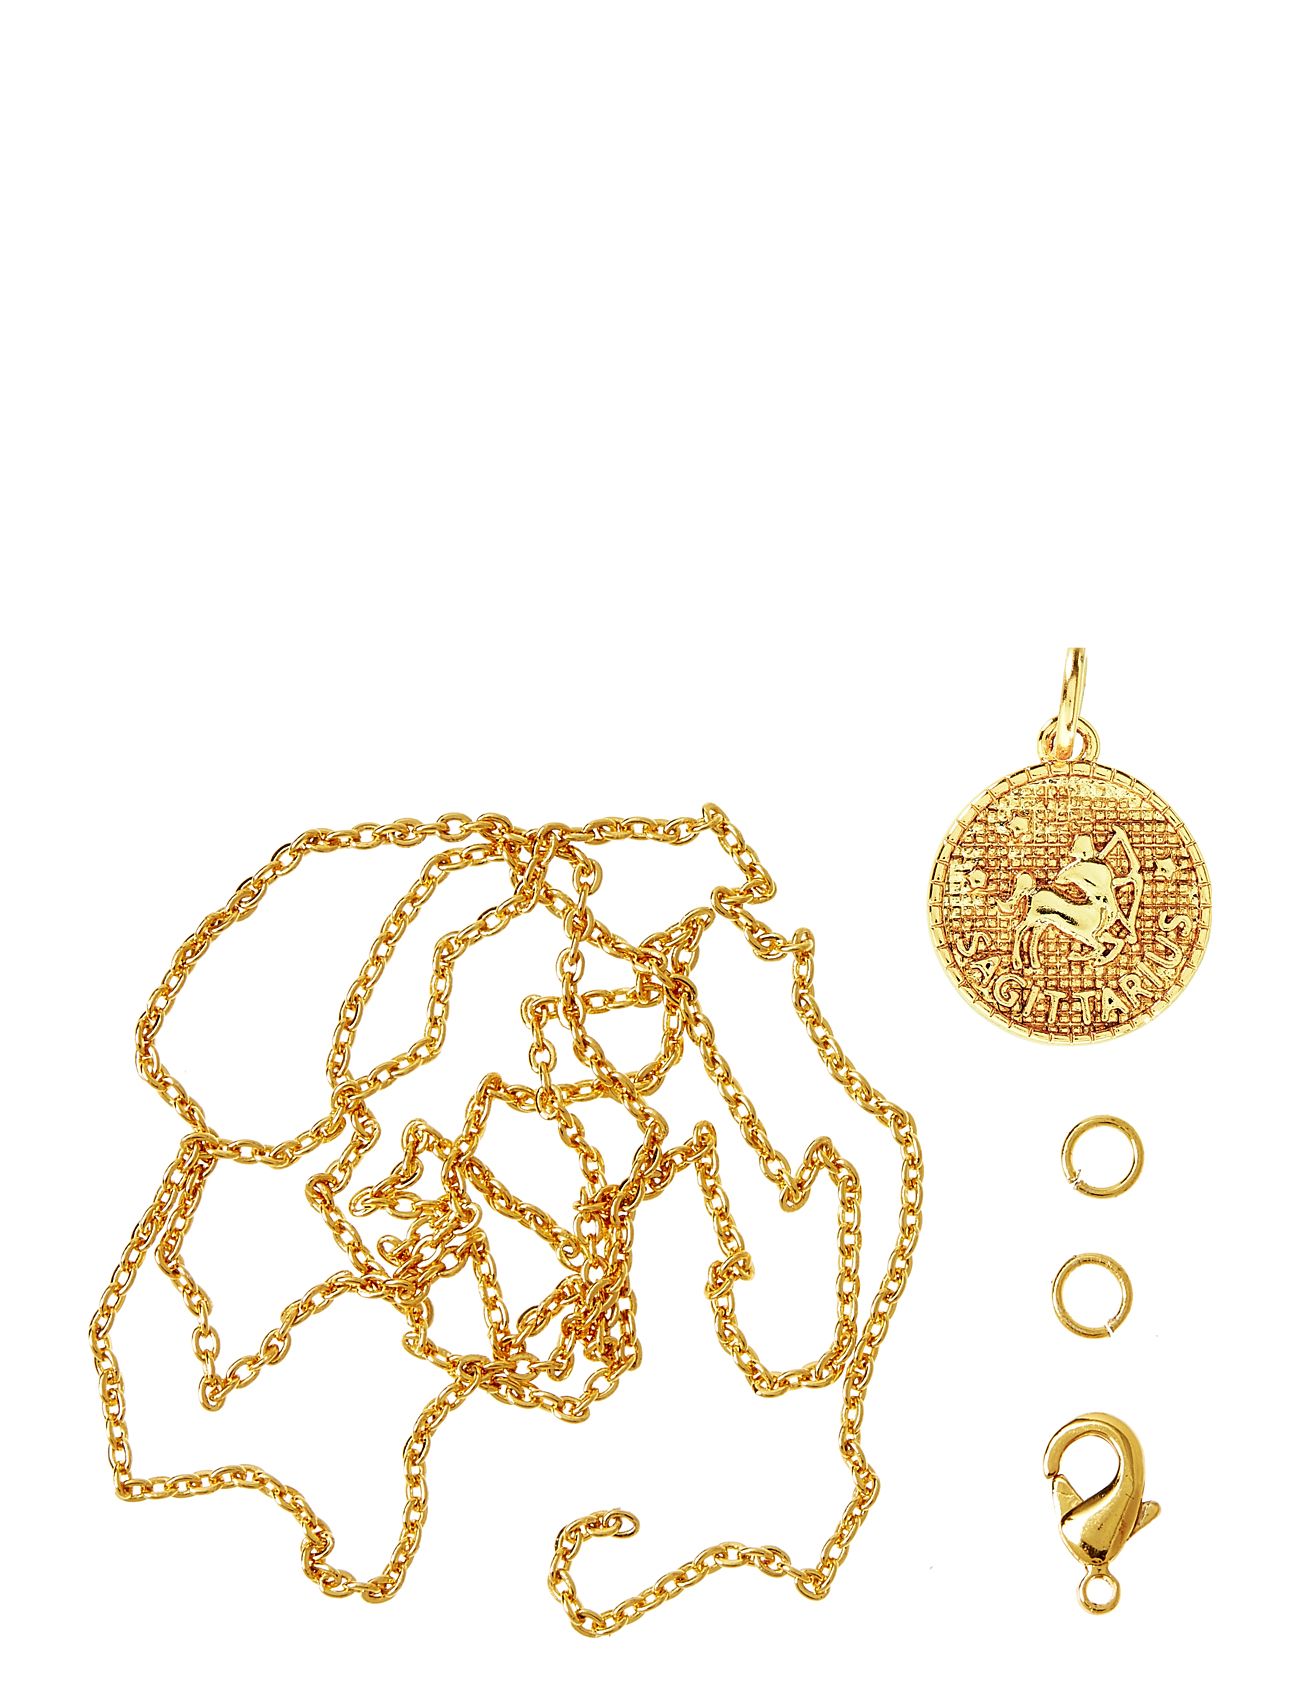 Zodiac Coin Pendant And Chain Set, Sagittarius Toys Creativity Drawing & Crafts Craft Jewellery & Accessories Gold Me & My Box